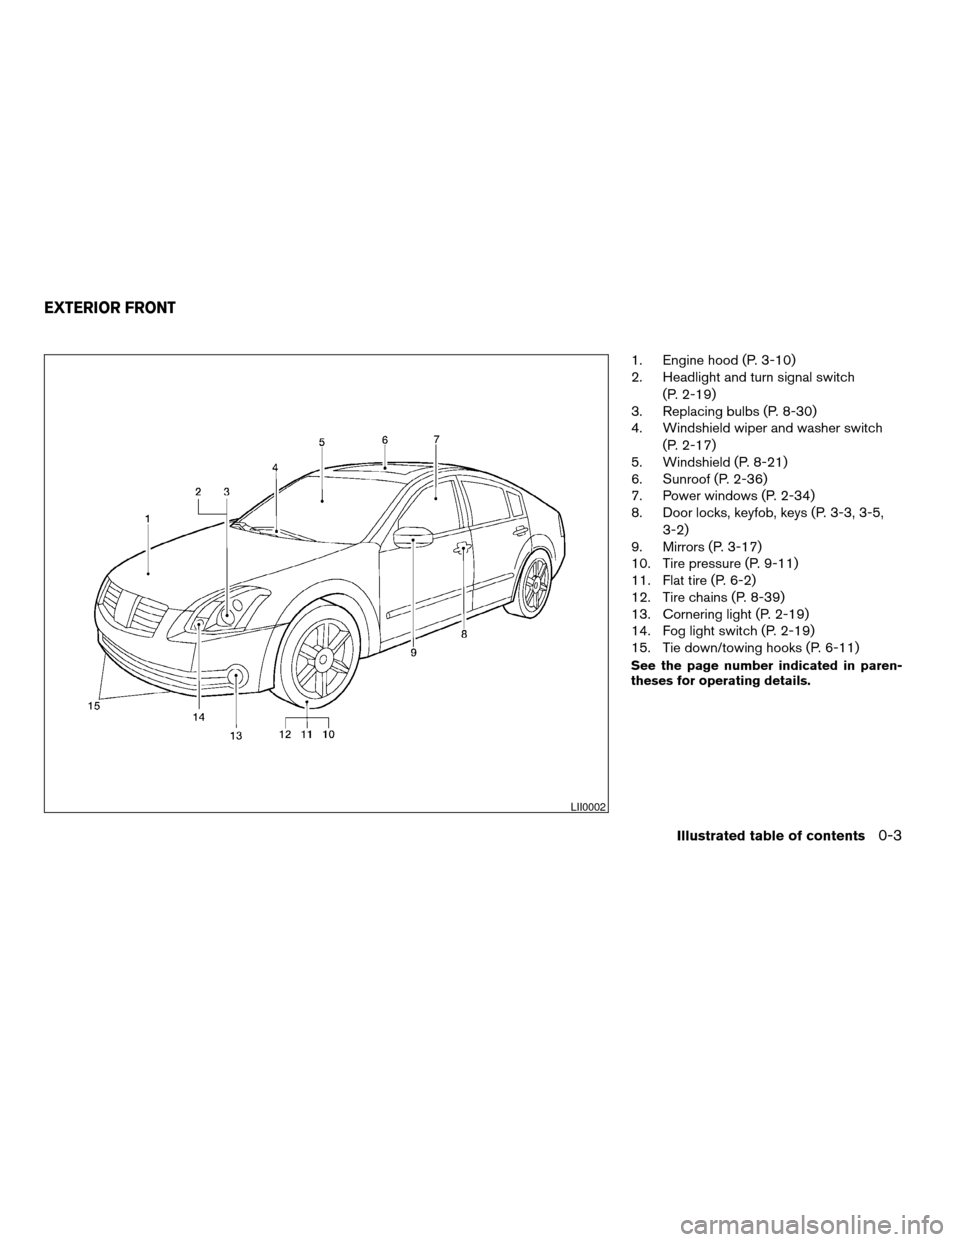 NISSAN MAXIMA 2004 A34 / 6.G Owners Manual 1. Engine hood (P. 3-10)
2. Headlight and turn signal switch
(P. 2-19)
3. Replacing bulbs (P. 8-30)
4. Windshield wiper and washer switch
(P. 2-17)
5. Windshield (P. 8-21)
6. Sunroof (P. 2-36)
7. Powe